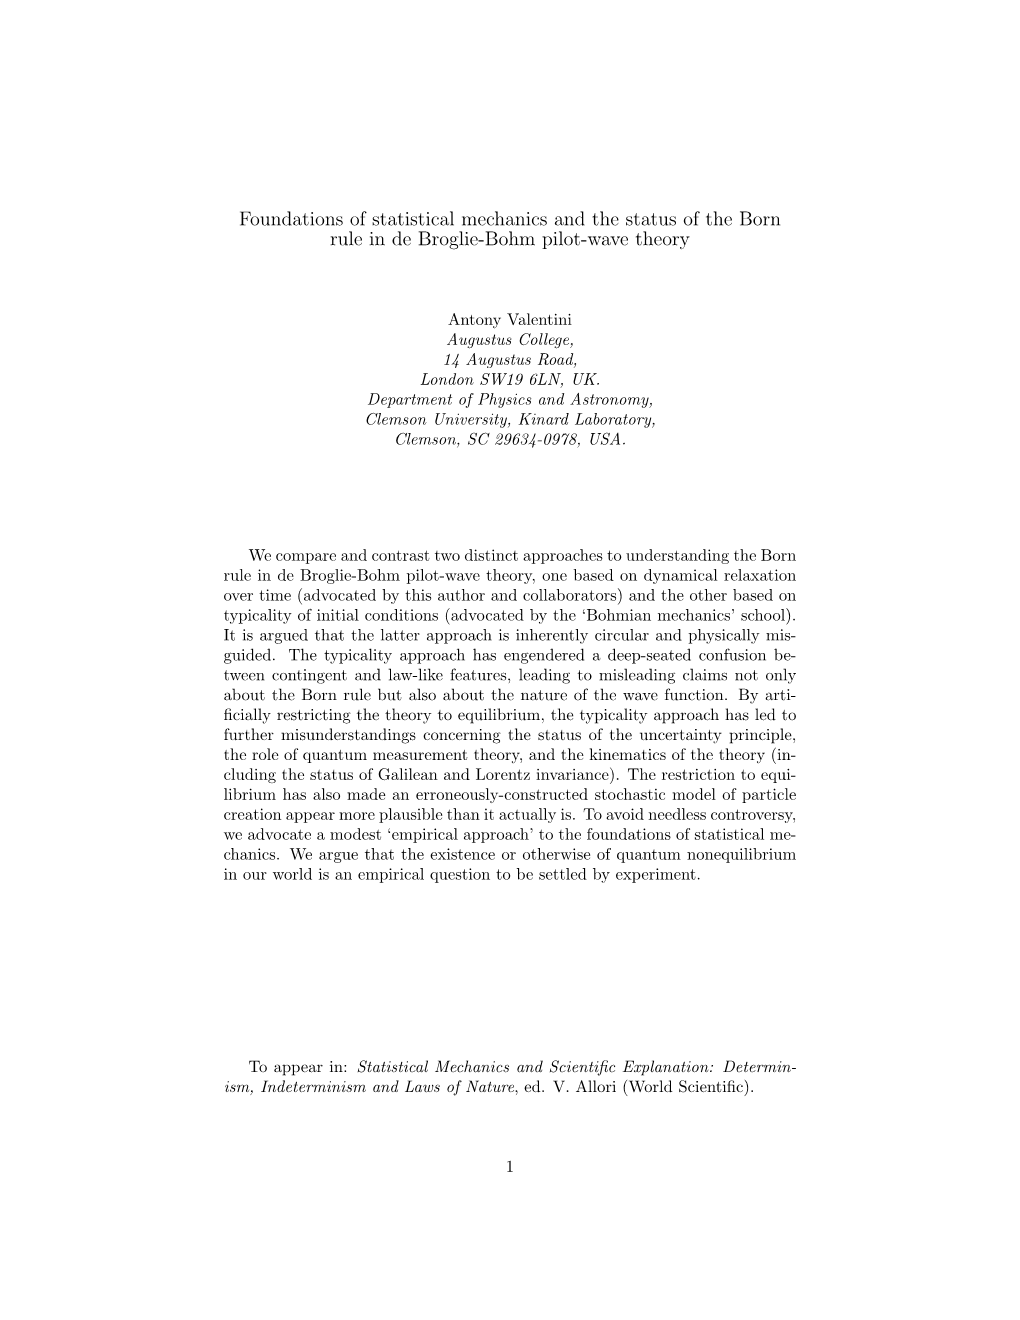 Foundations of Statistical Mechanics and the Status of the Born Rule in De Broglie-Bohm Pilot-Wave Theory